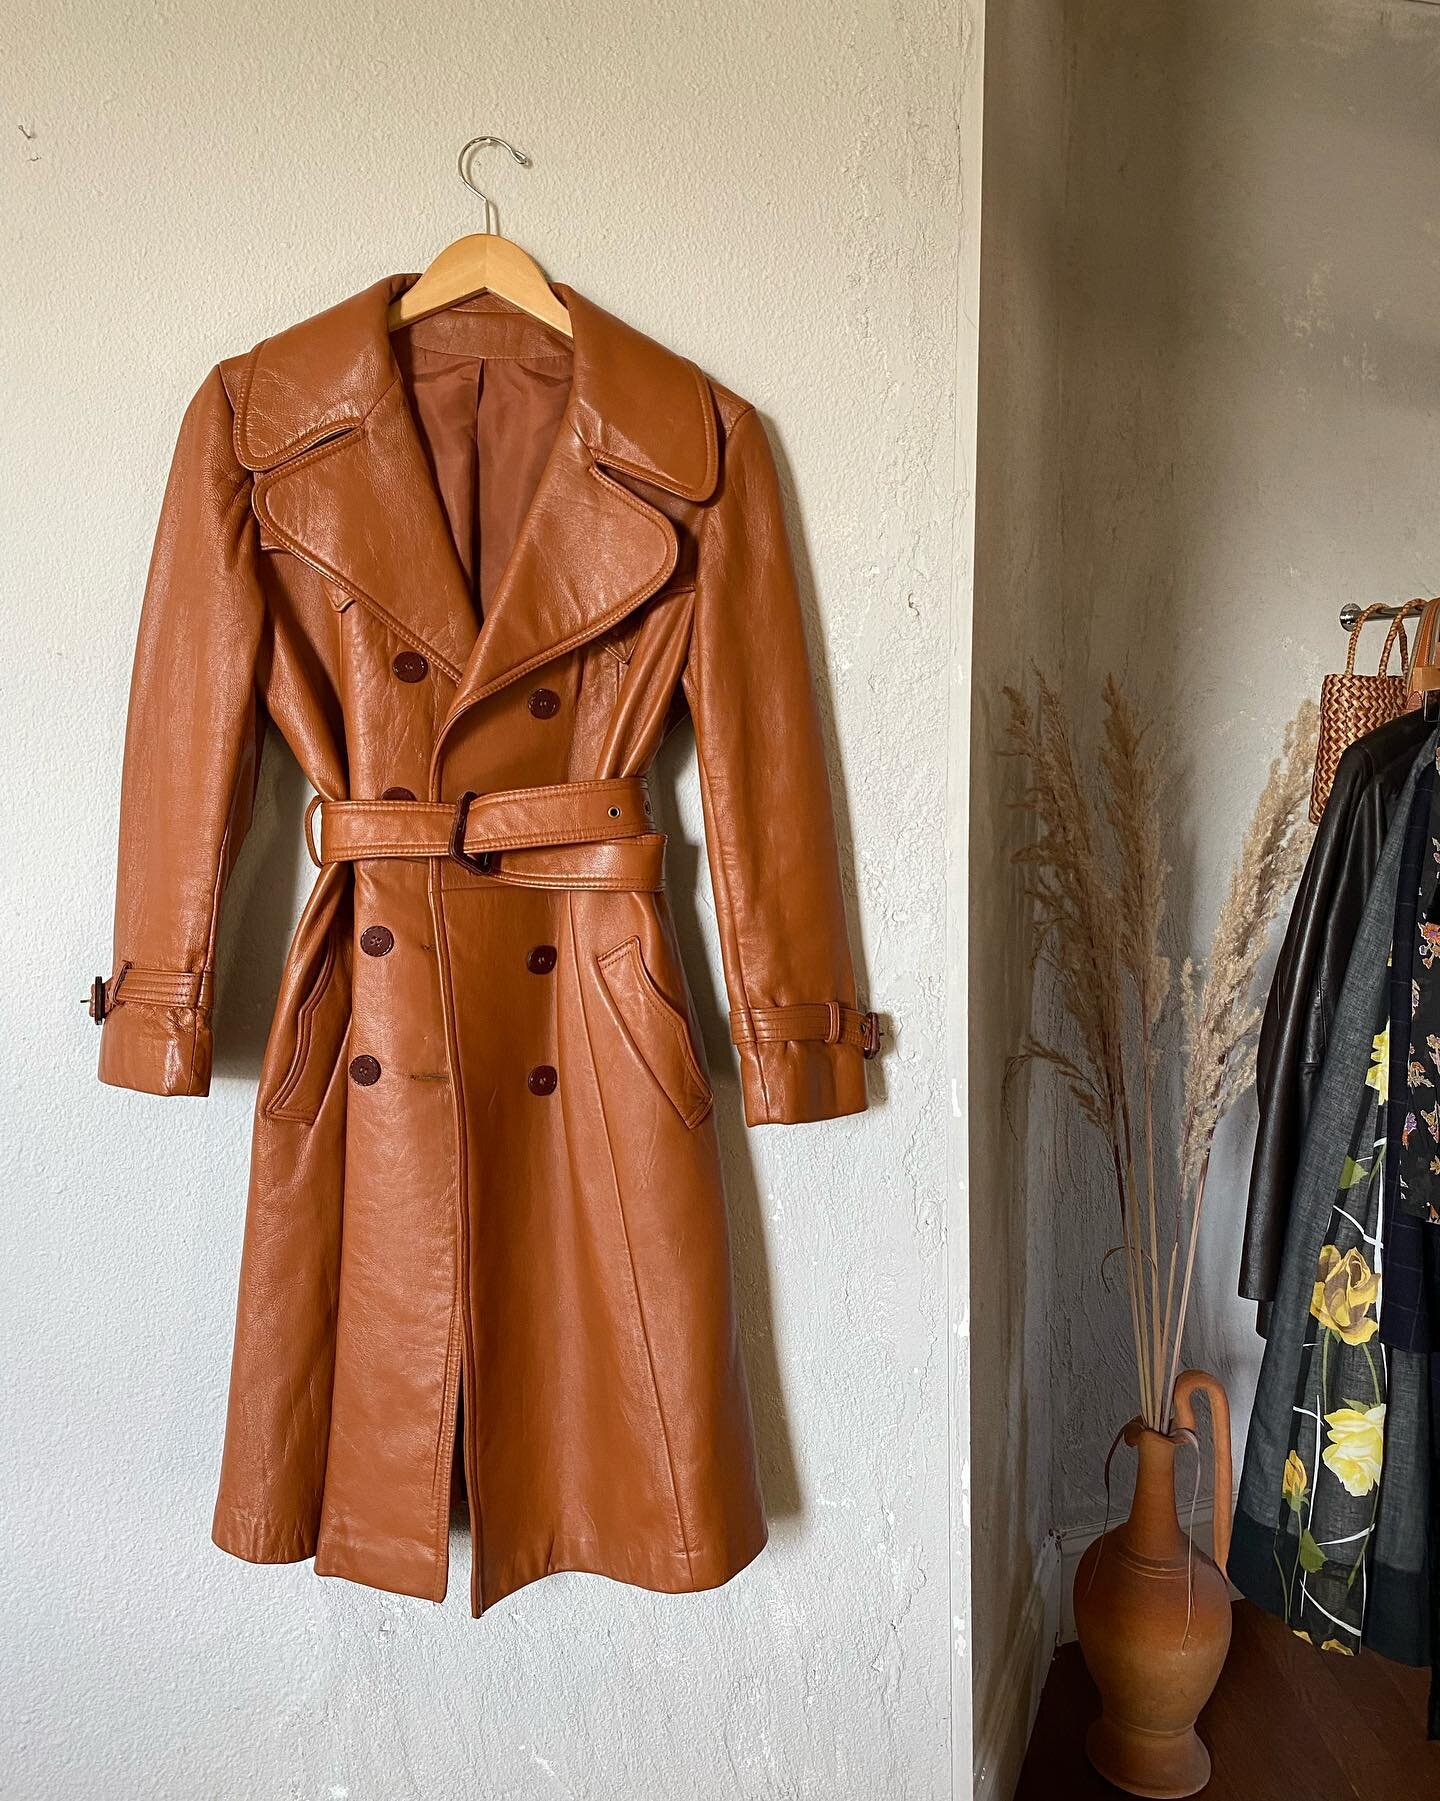 Beautiful 70&rsquo;s honey leather trench (size large) along with tons of fresh spring duds available at the YFA Market @yourfriendsapartment this Friday @theluminaryarts from 5-10pm! Swipe for the full vendor list - it&rsquo;s gonna be the best time